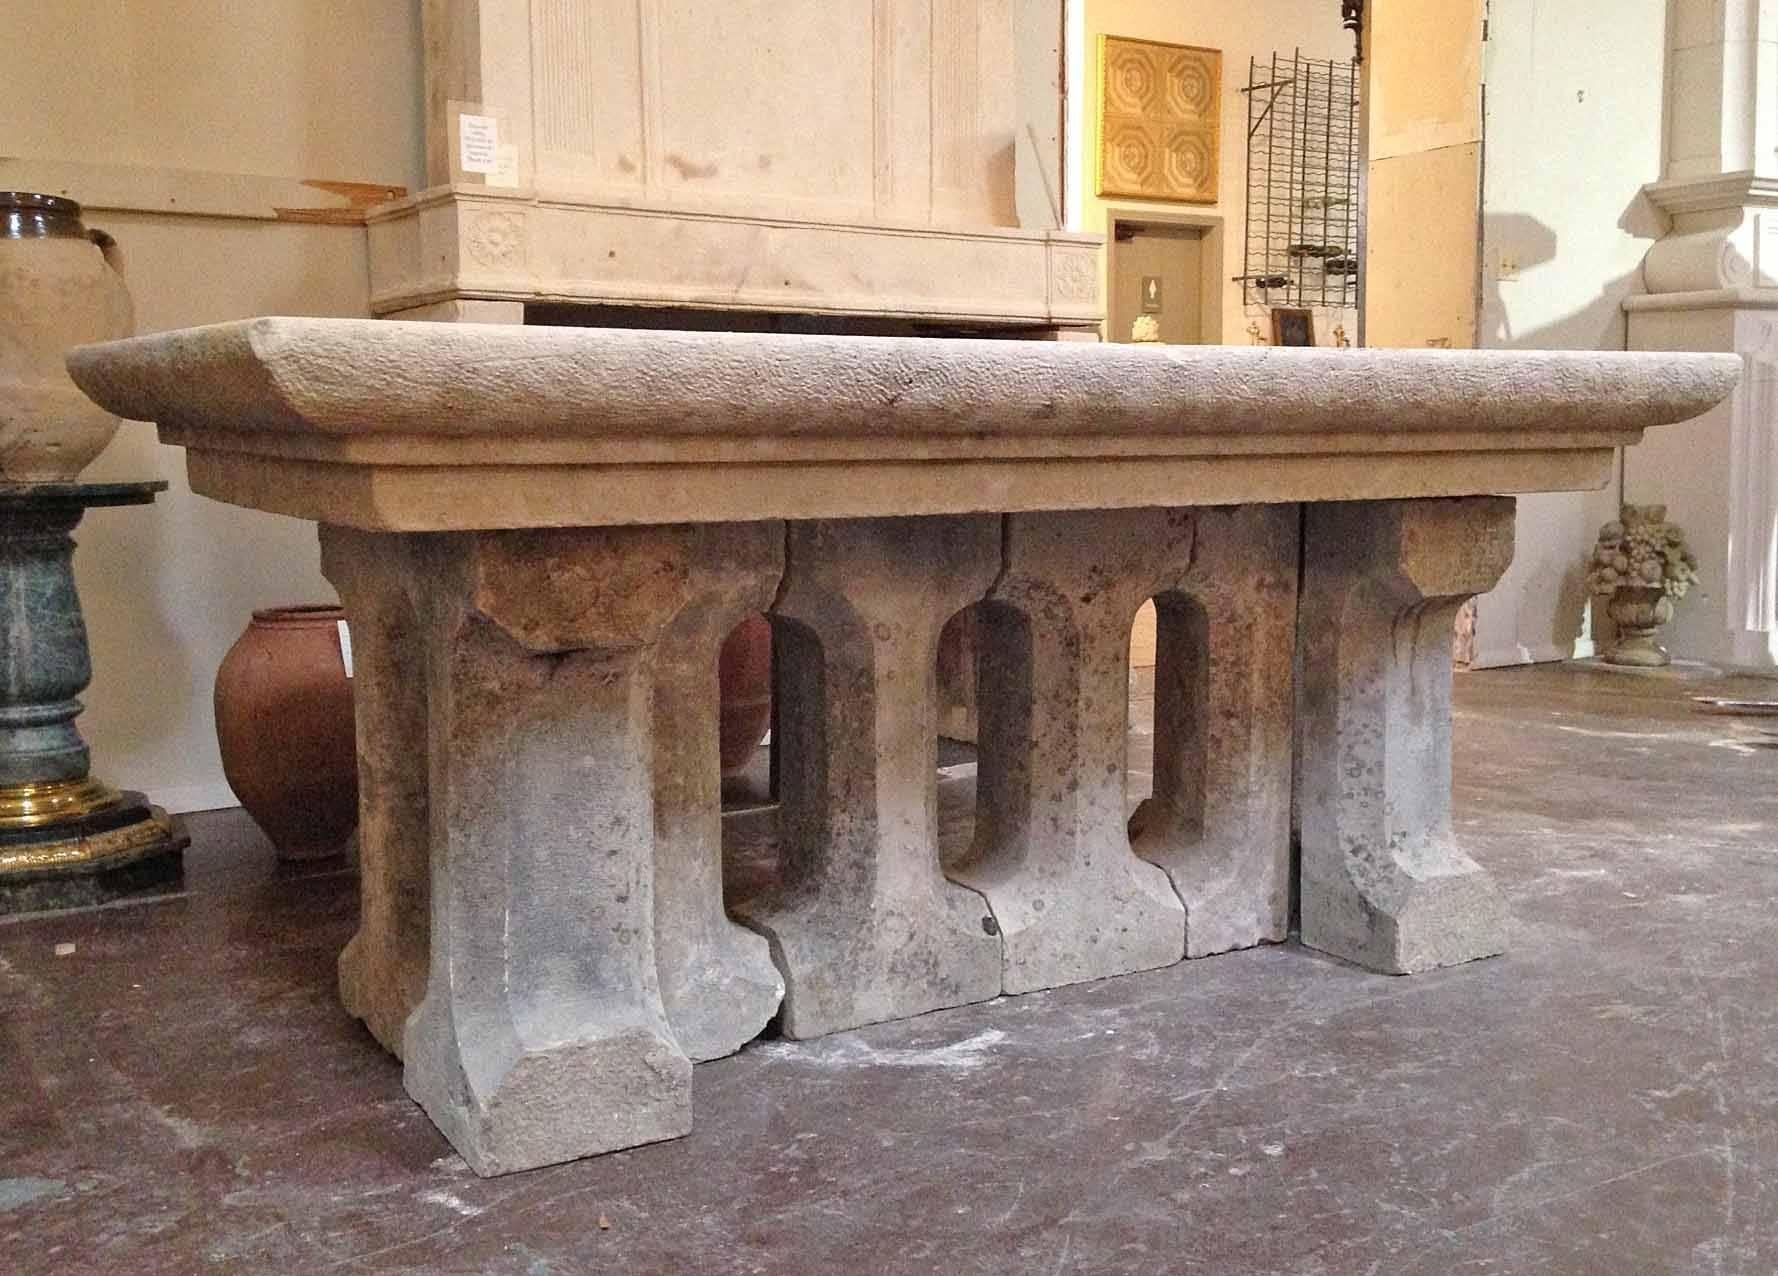 From France’s Loire Valley, a romantic landscape studded with historic French chateaus, we have this extraordinary Gothic stone table. Hand carved circa 1750, the stone table has a lovely, aged patina and makes a lasting impression on all. This